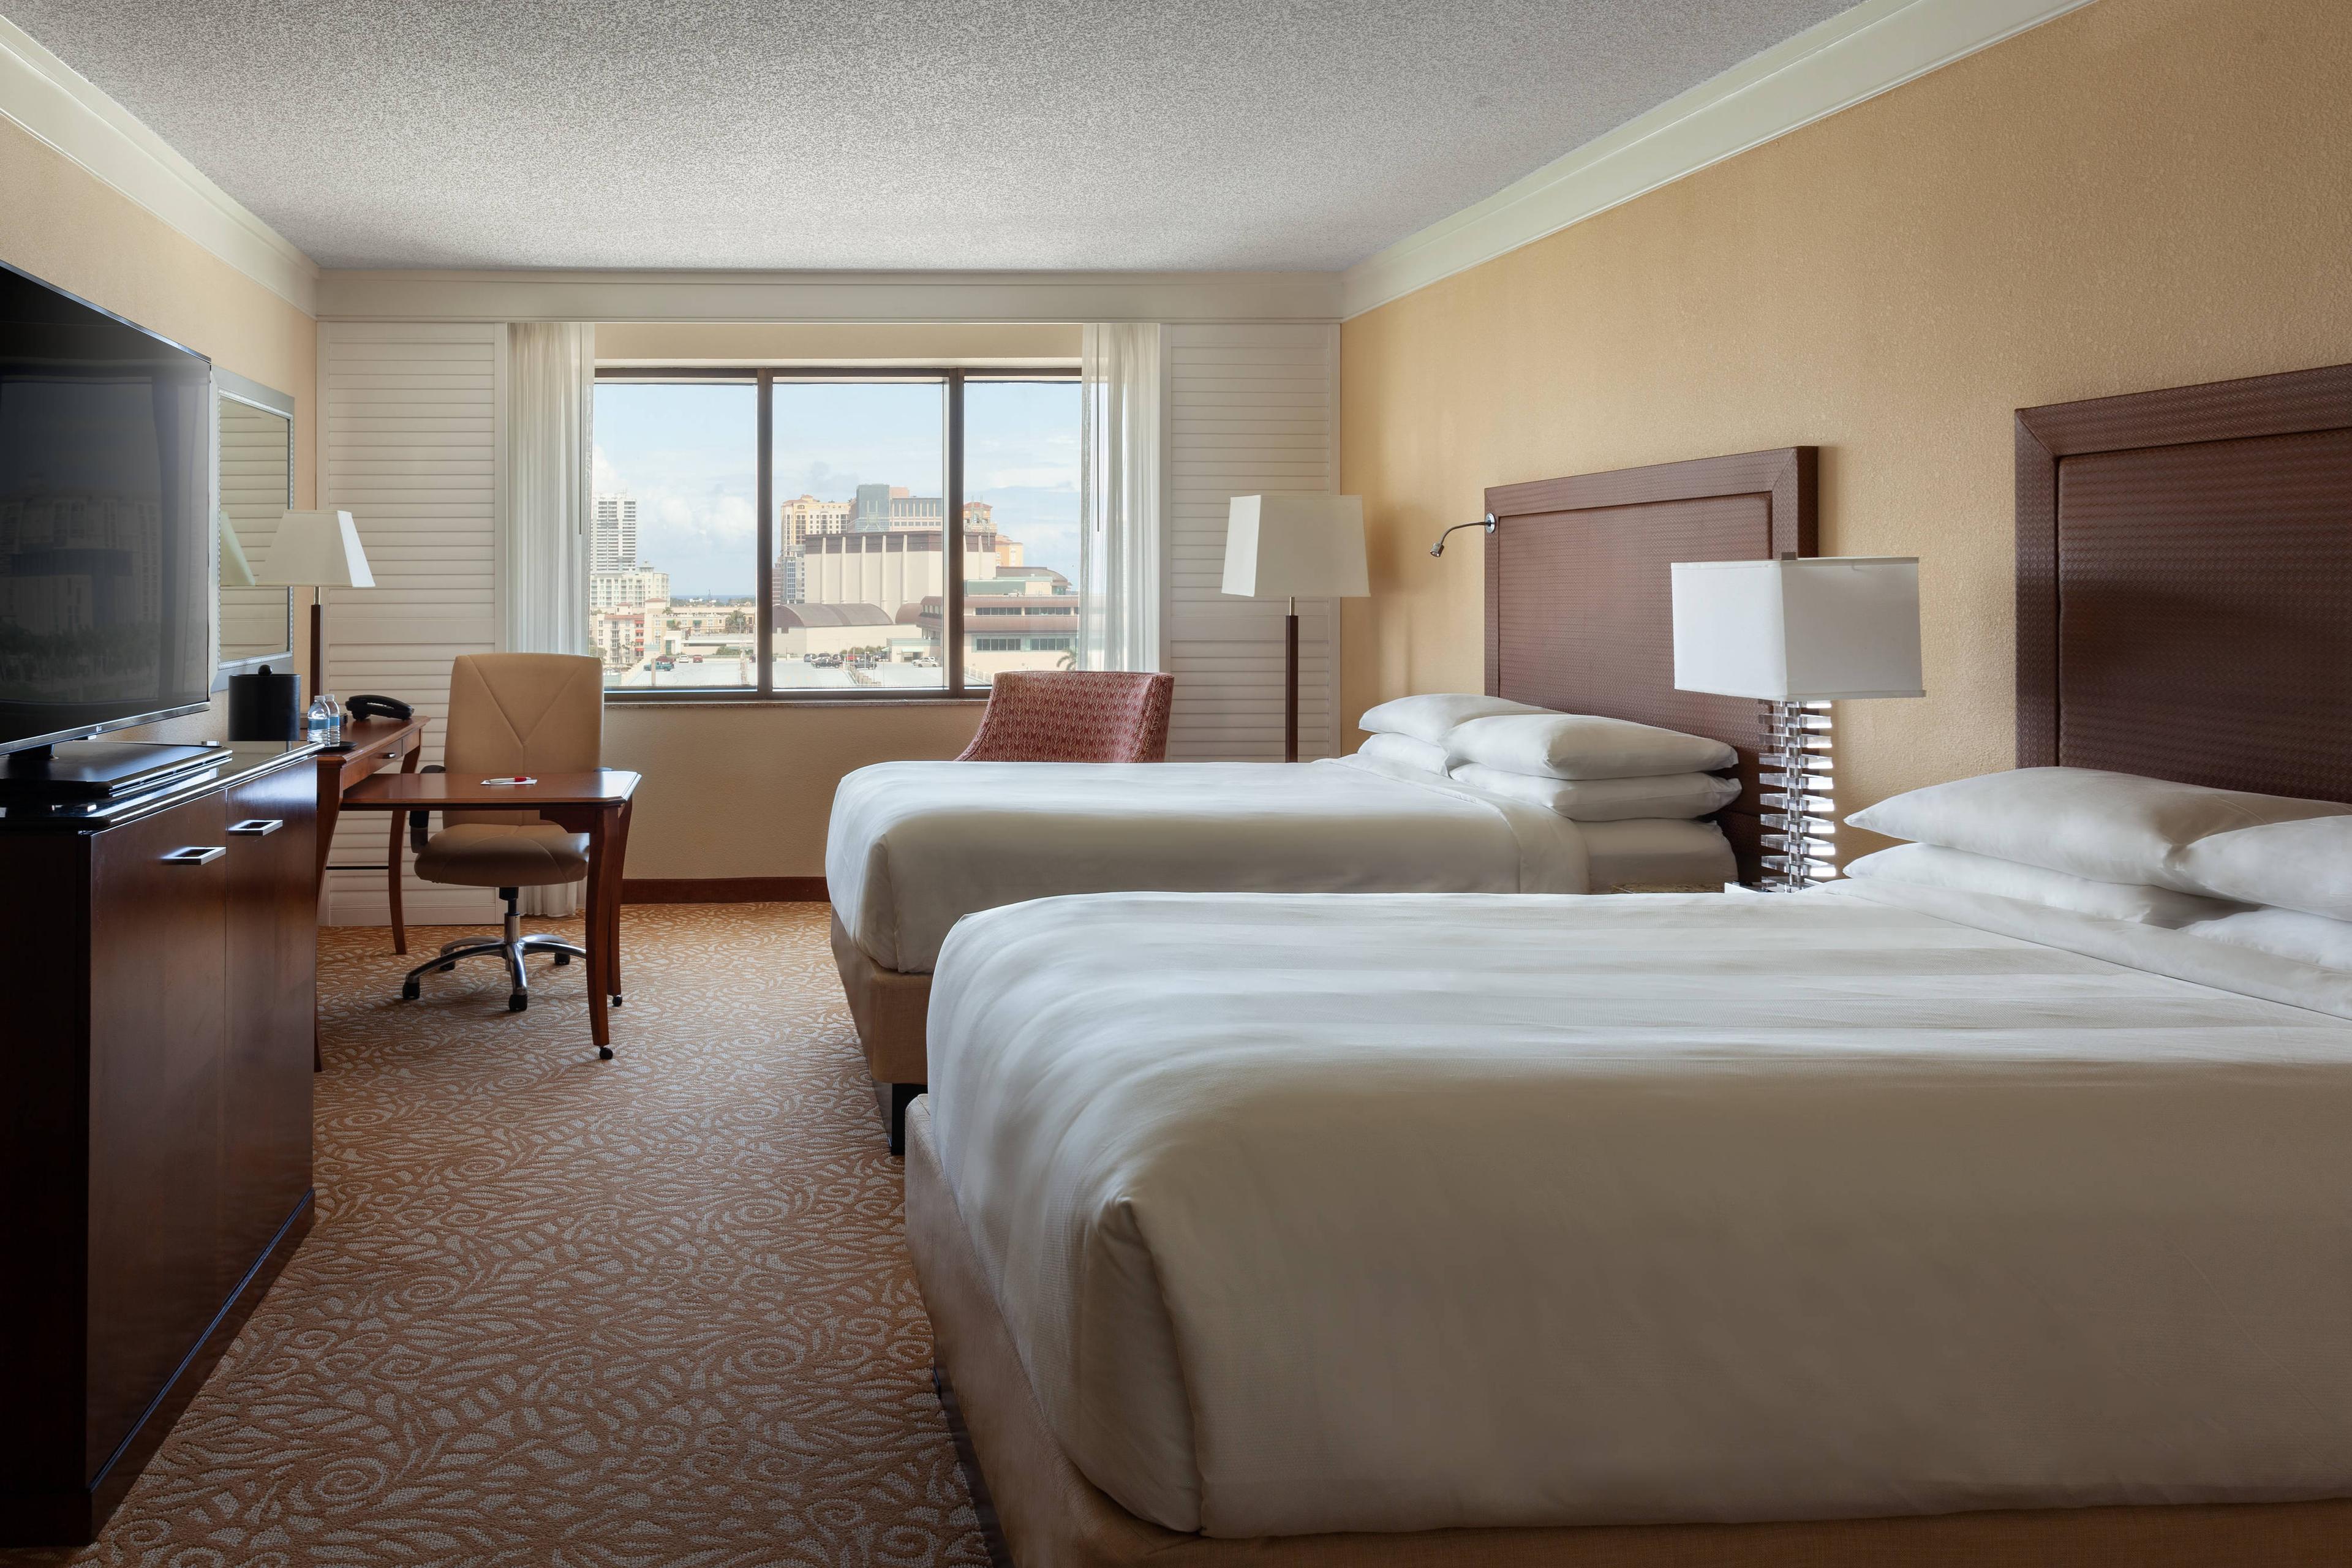 Double/double guest rooms feature plush beds, mini refrigerators, large flat-screen TVs and great city views.